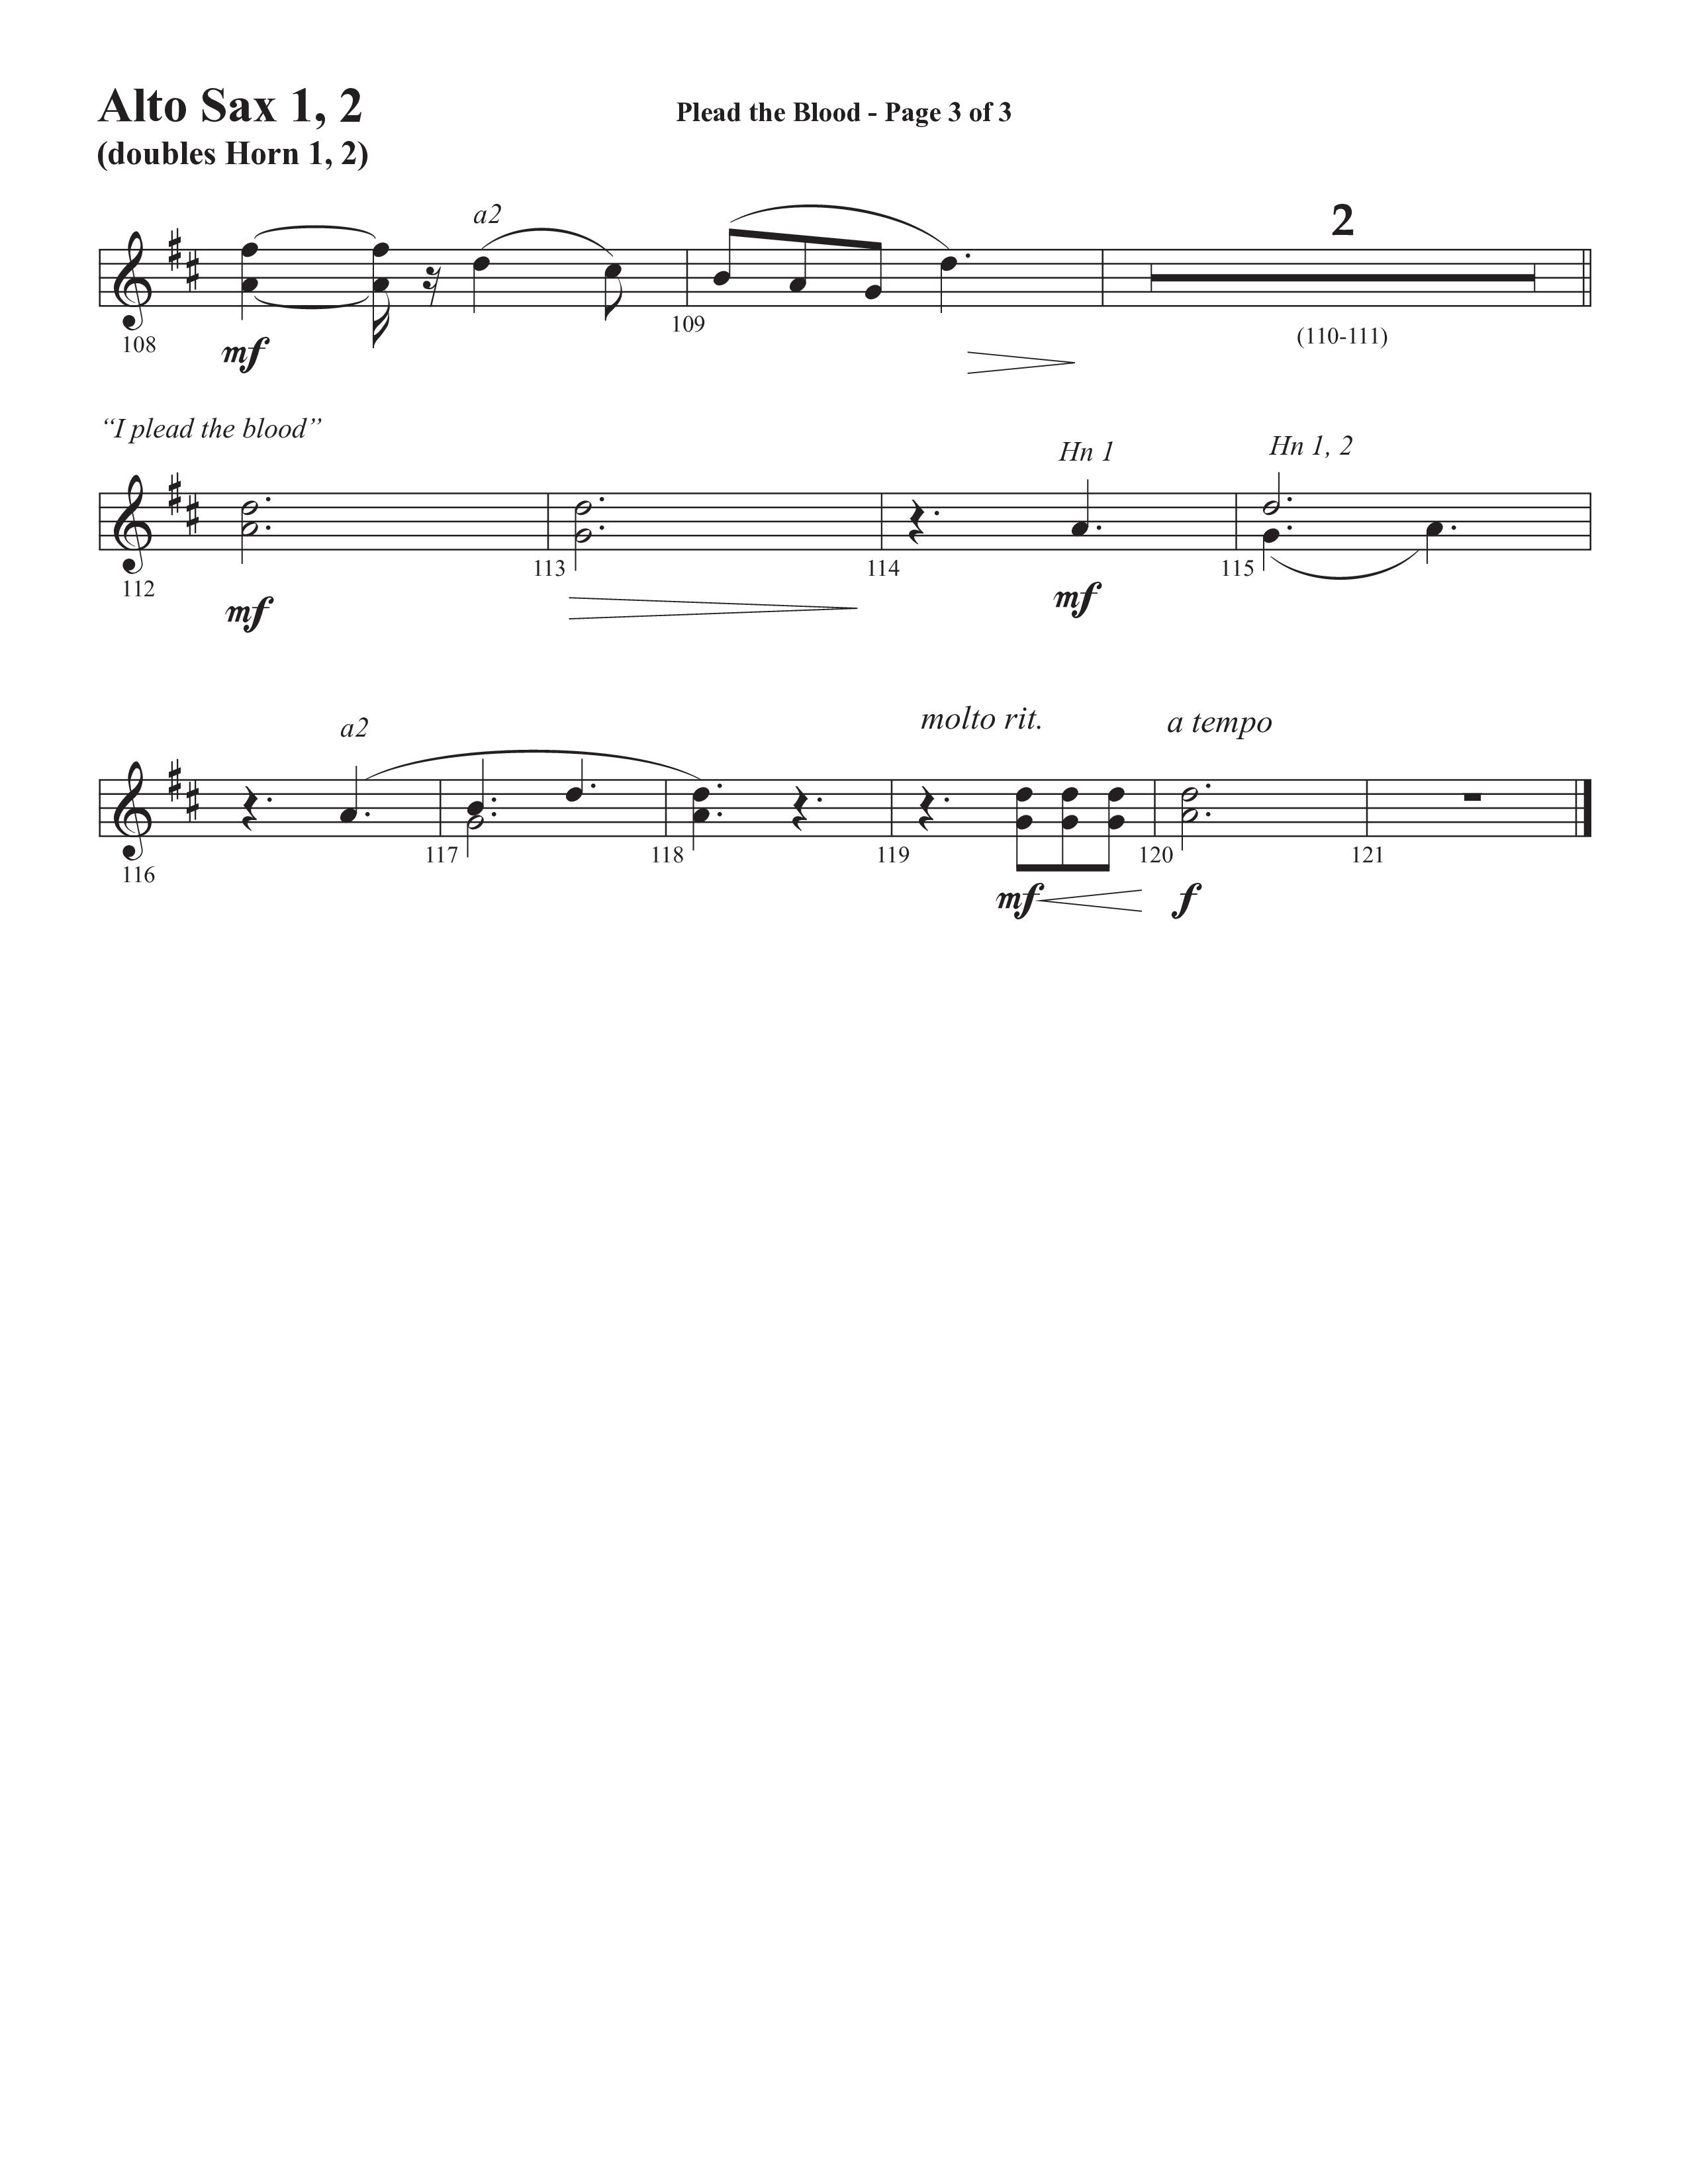 Plead The Blood (with Nothing But The Blood) (Choral Anthem SATB) Alto Sax 1/2 (Semsen Music / Arr. Debora Cahoon)